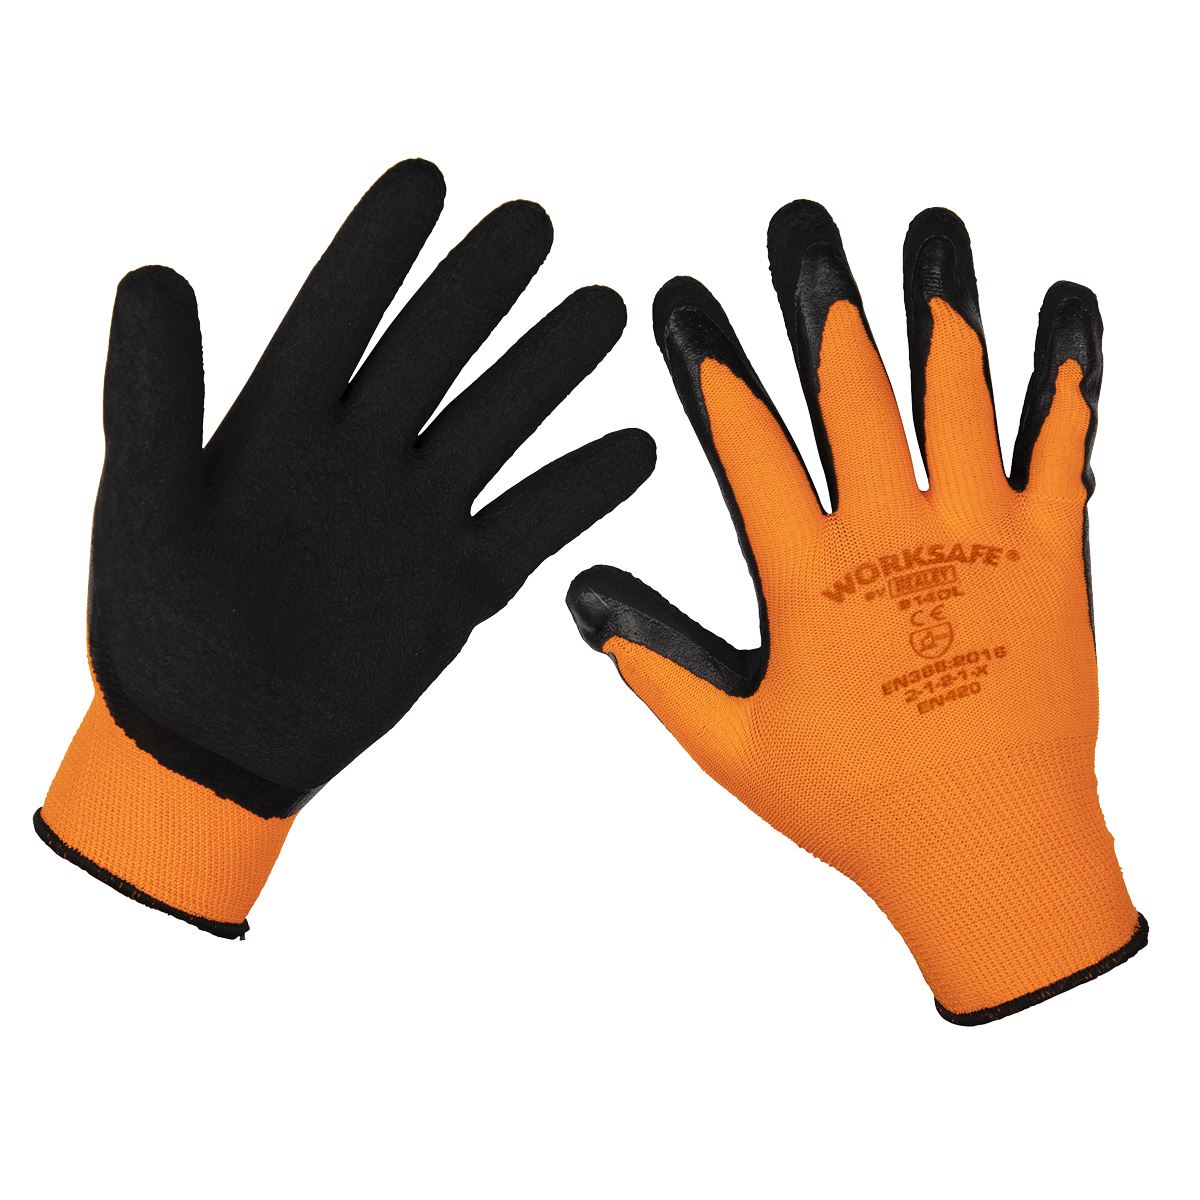 Worksafe by Sealey Foam Latex Gloves (Large) - Pack of 120 Pairs